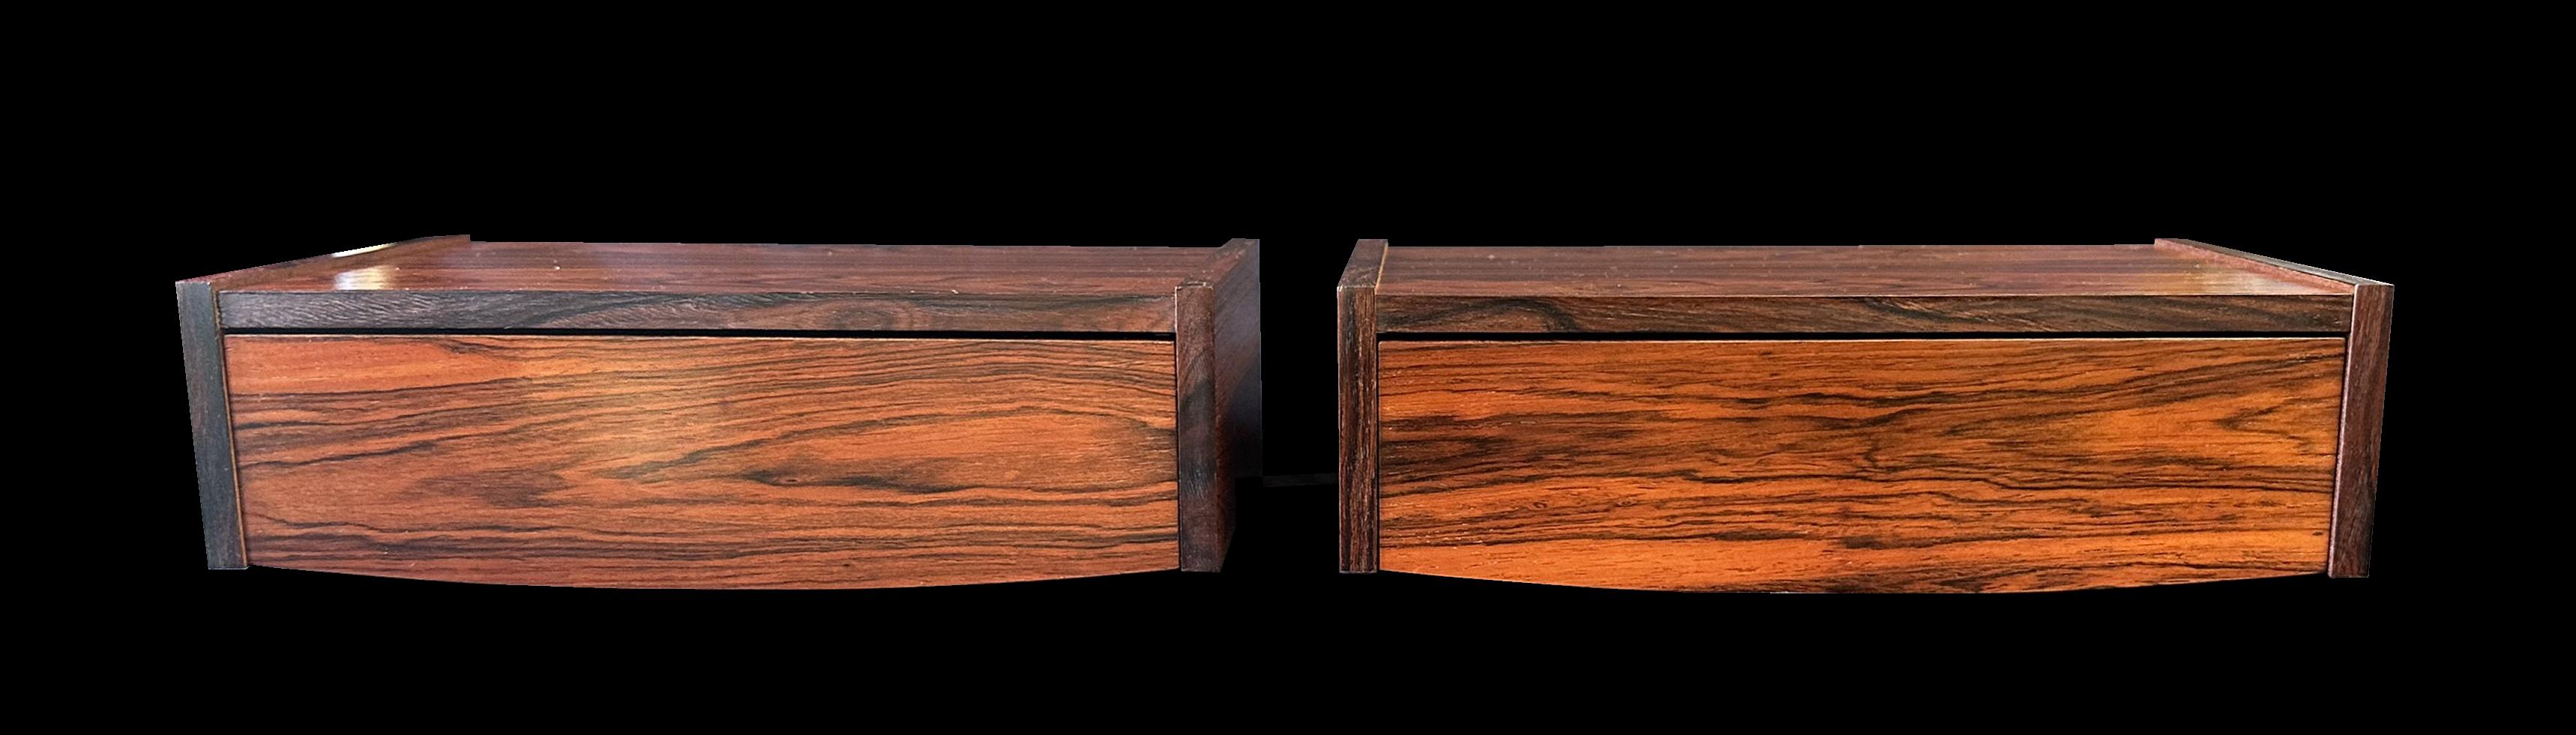 These are very nice Santos Rosewood (machaerium Scleroxylon) single drawer bedsides. They are mounted on the wall simply with two screws through the backboard and then replacing the drawer for invisible fixing.
Condition is excellent on both, and